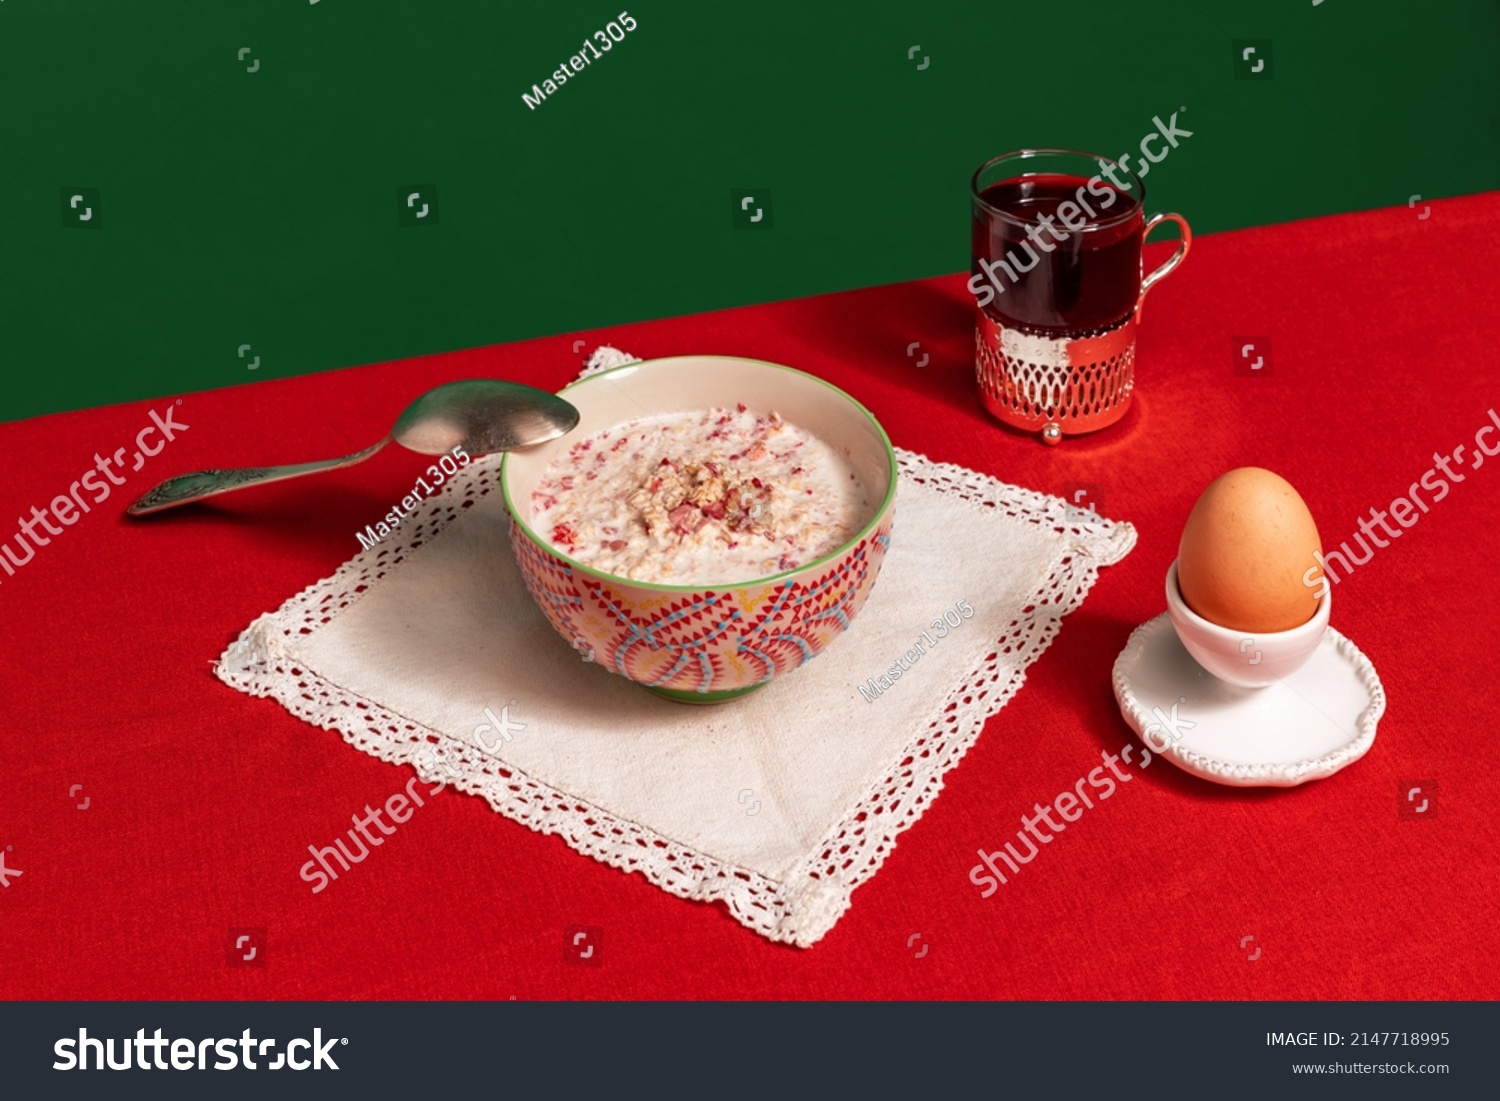 English traditions. Served breakfast table. Food pop art photography. Tea pot, grapefruit and porridge on red tablecloth over green background. Retro 80s, 70s style. Complementary colors, #2147718995